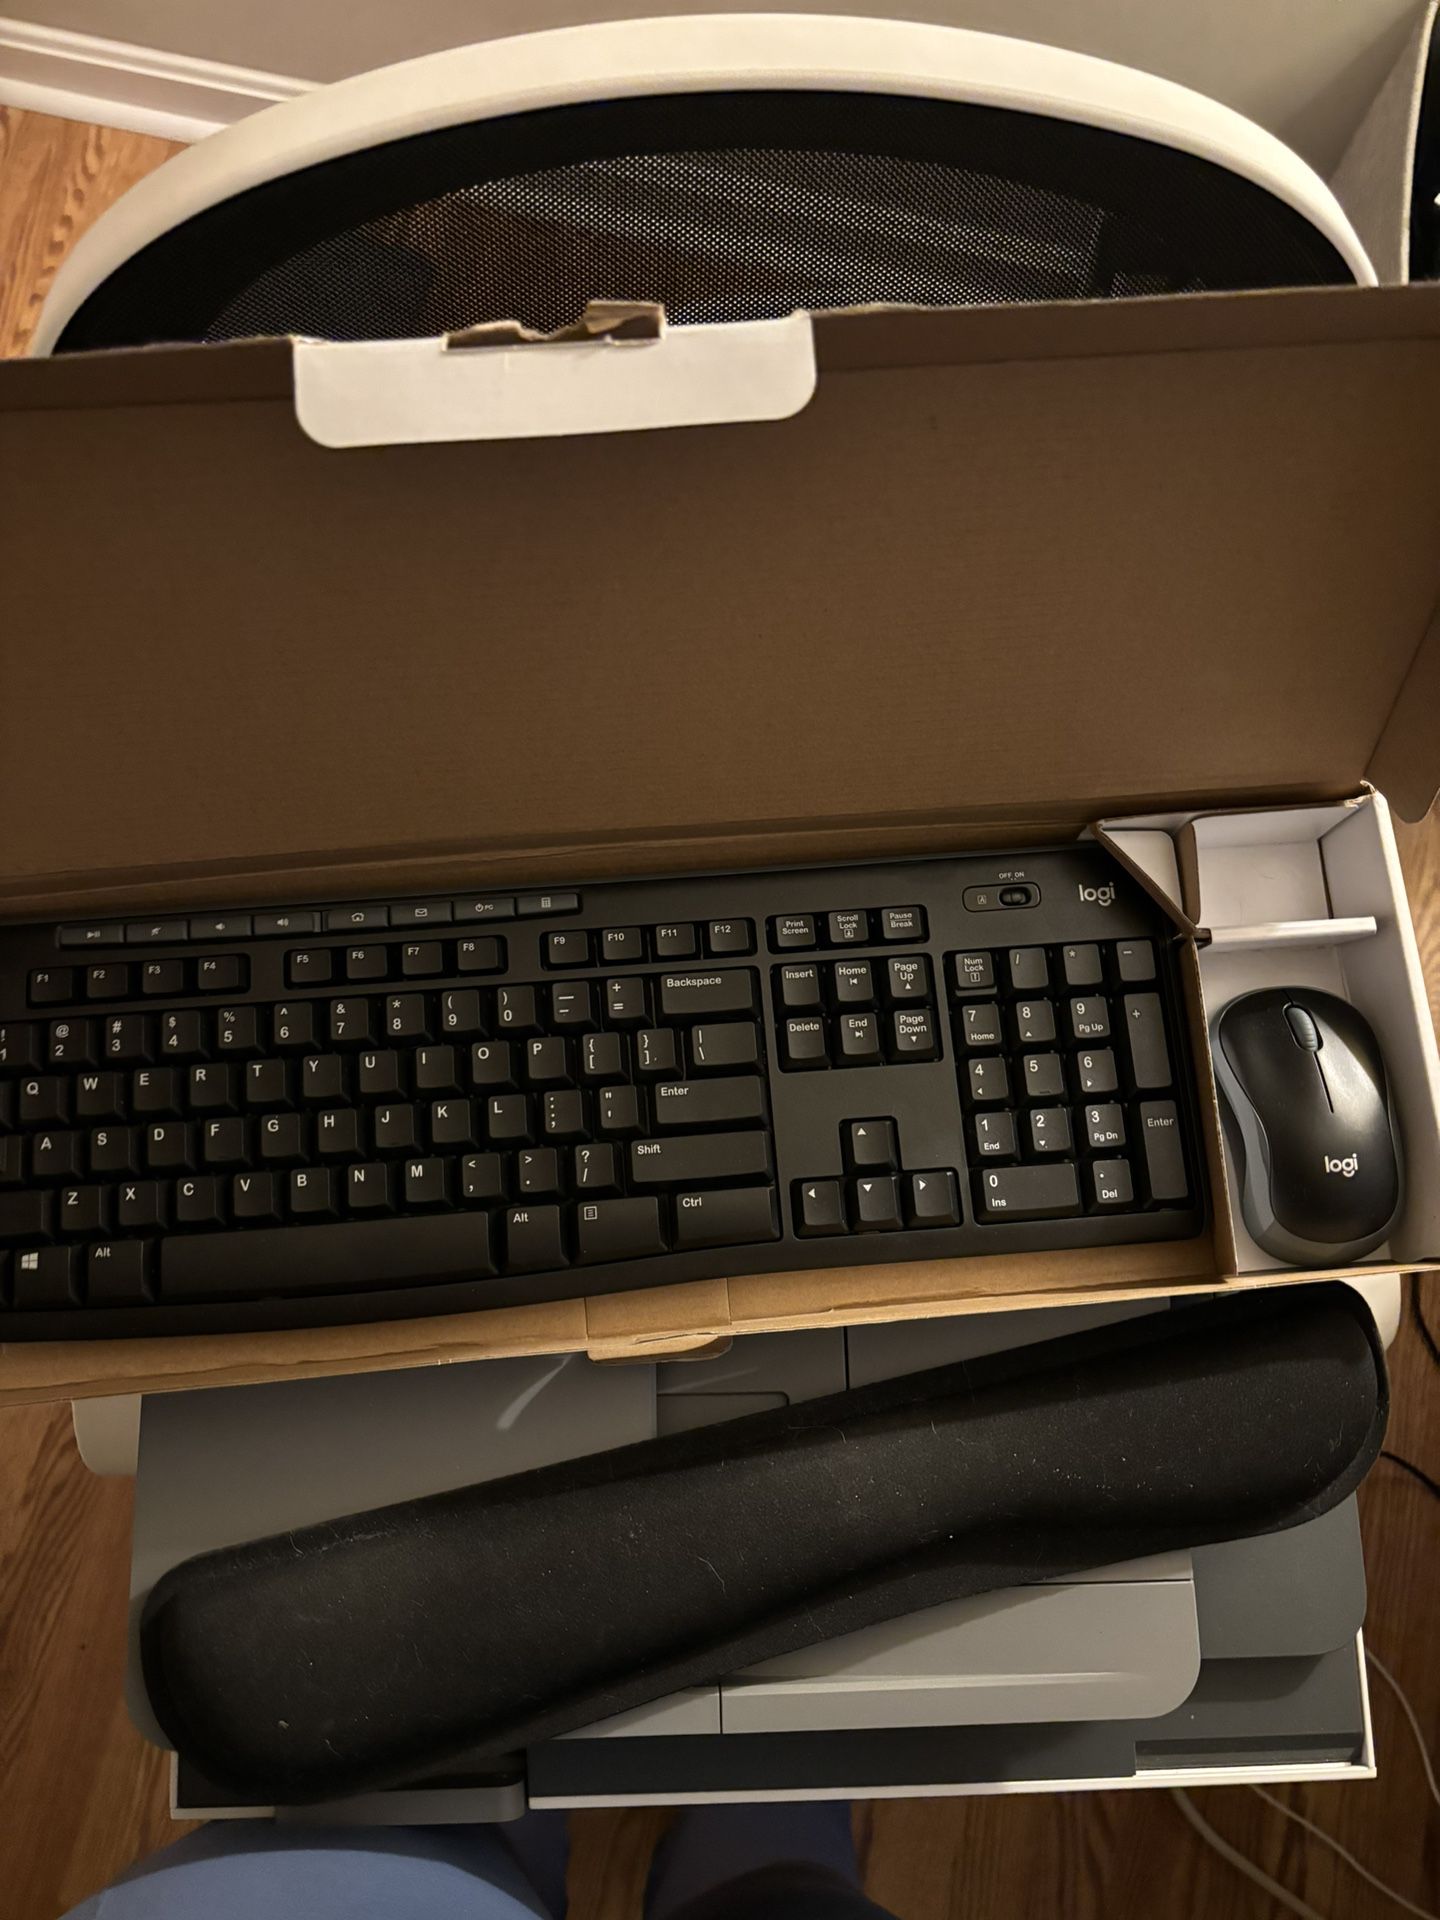 wireless mouse and keyboard including wrist pad 